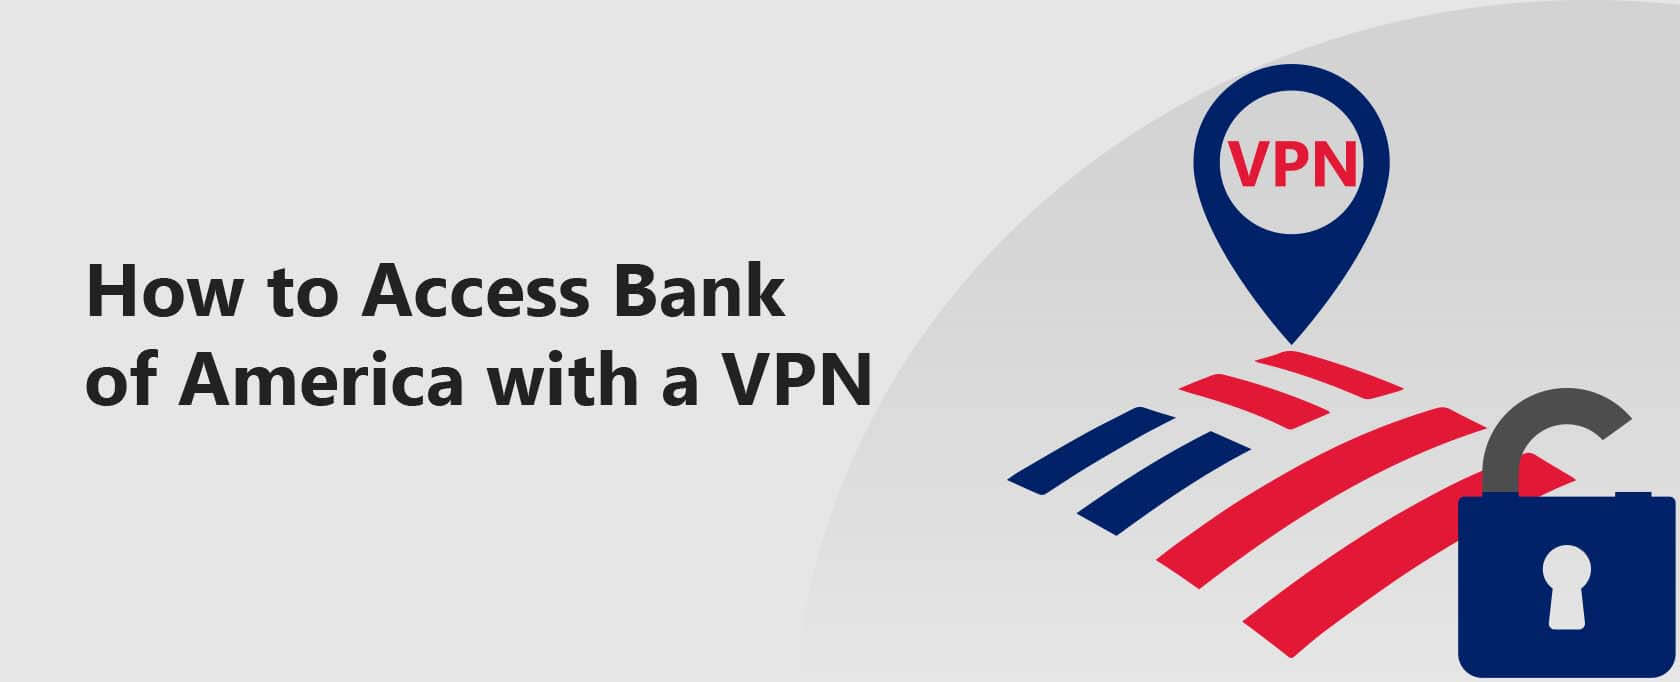 How to Access Bank of America with a VPN